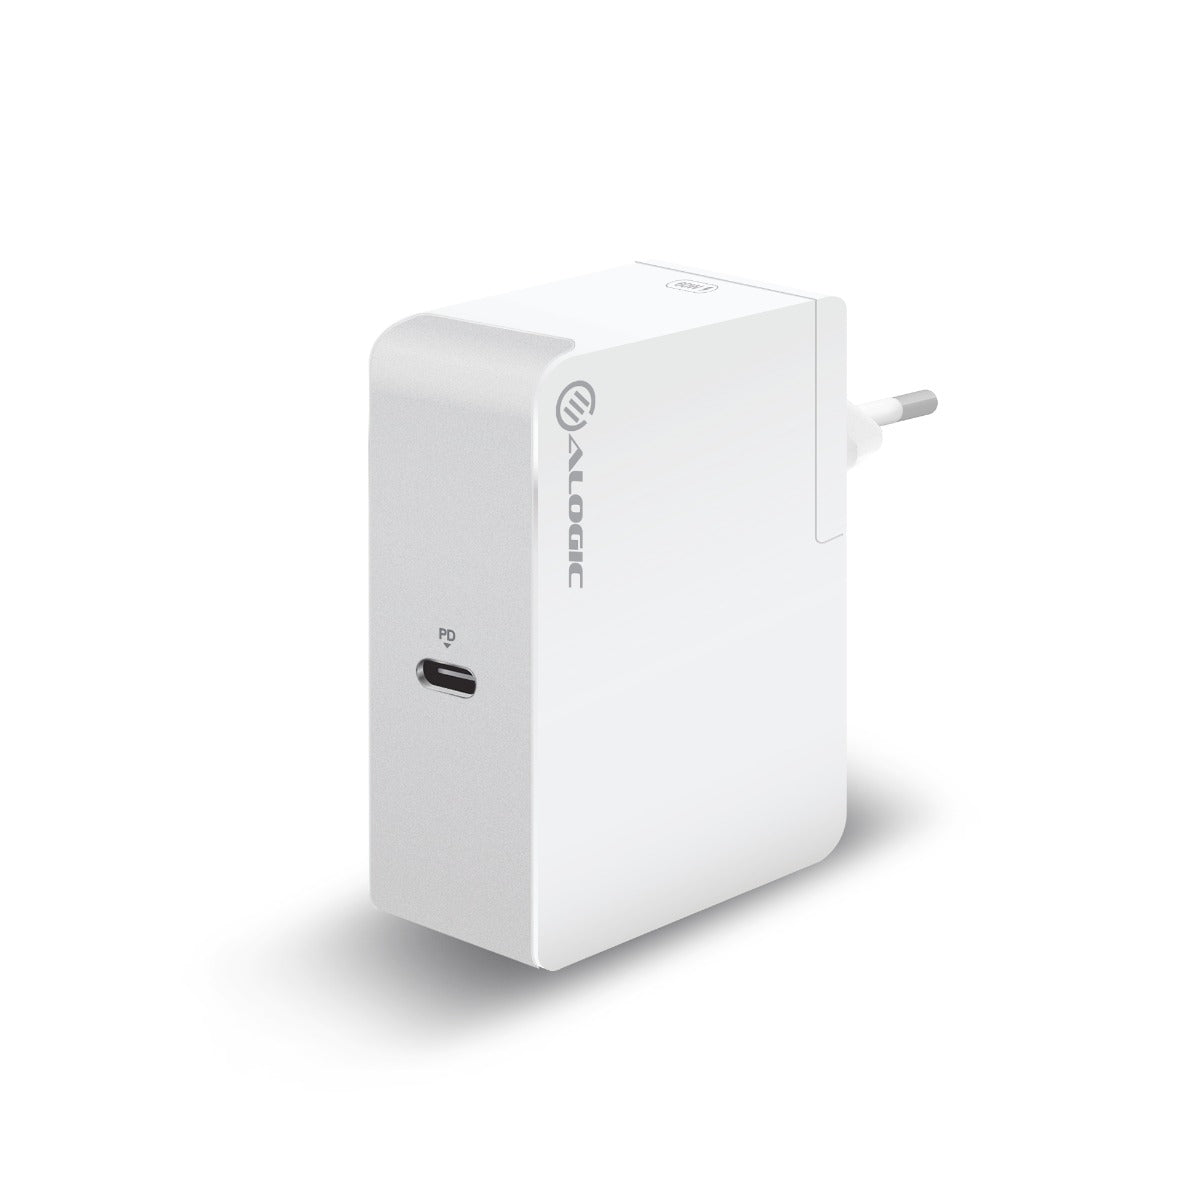 usb-c-laptop-macbook-wall-charger-60w-with-power-deliverya-travel-edition-with-au-eu-uk-us-plugs-and-2m-cable_2